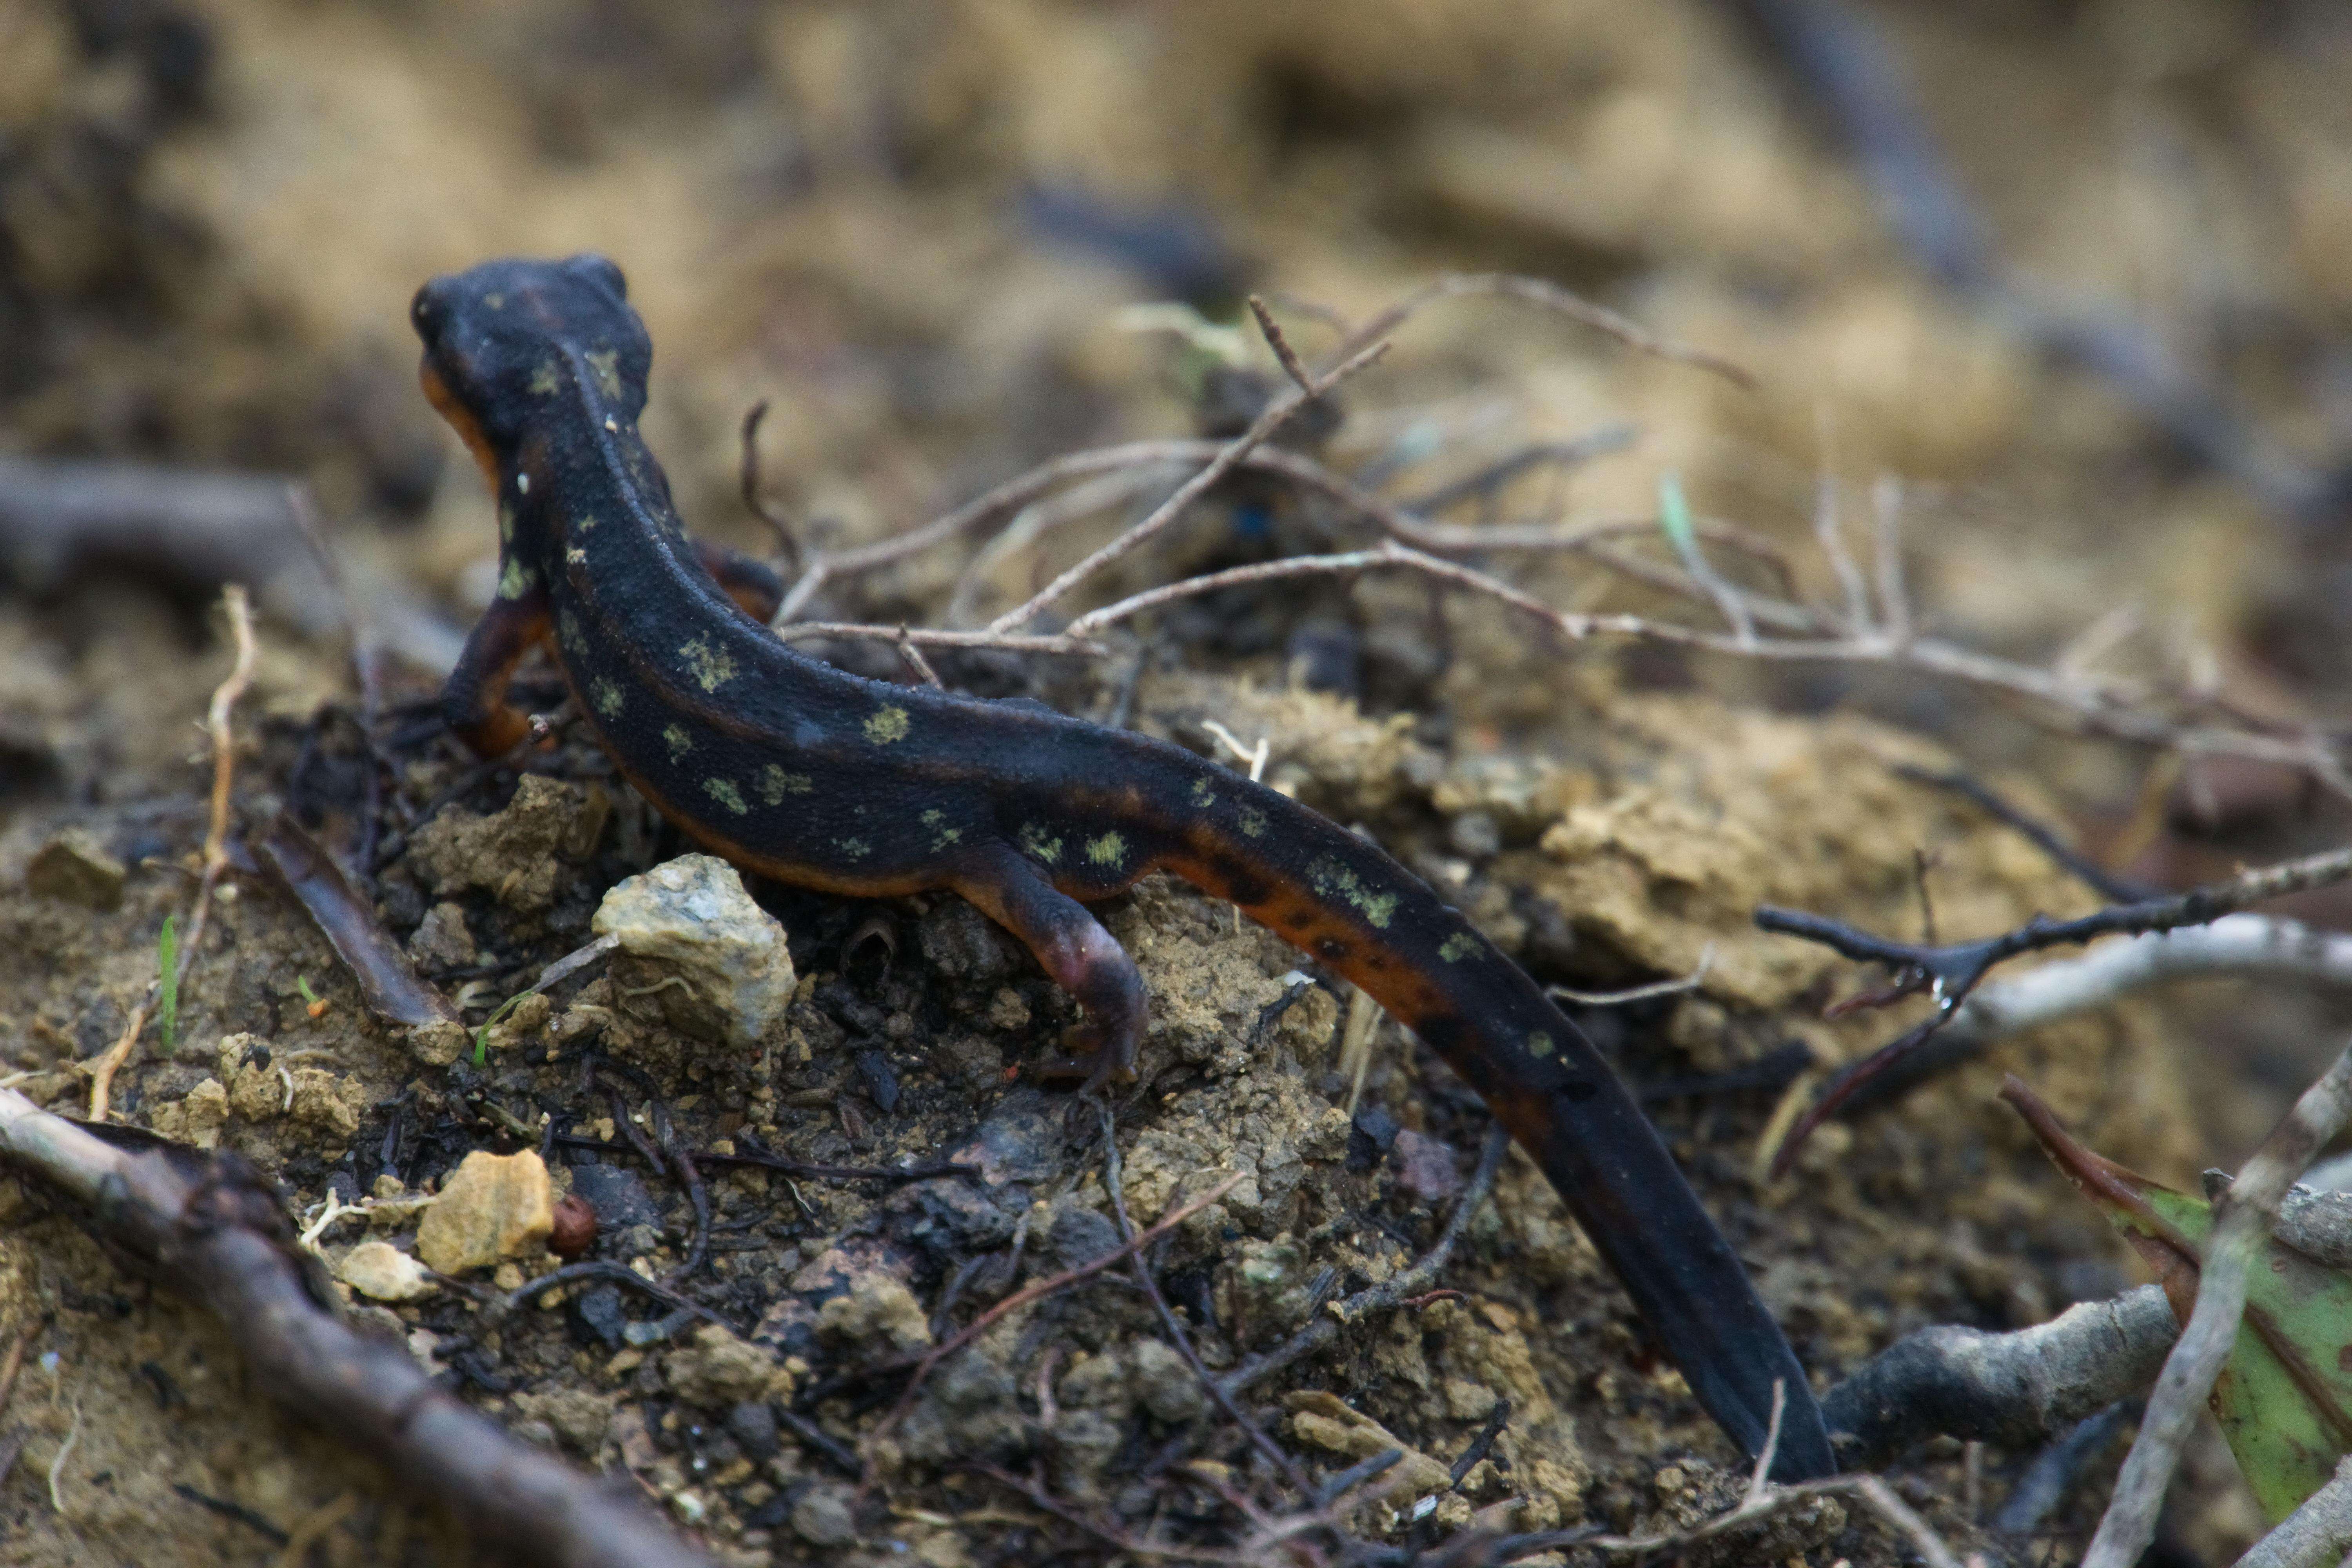 Image of Sword-tailed Newt